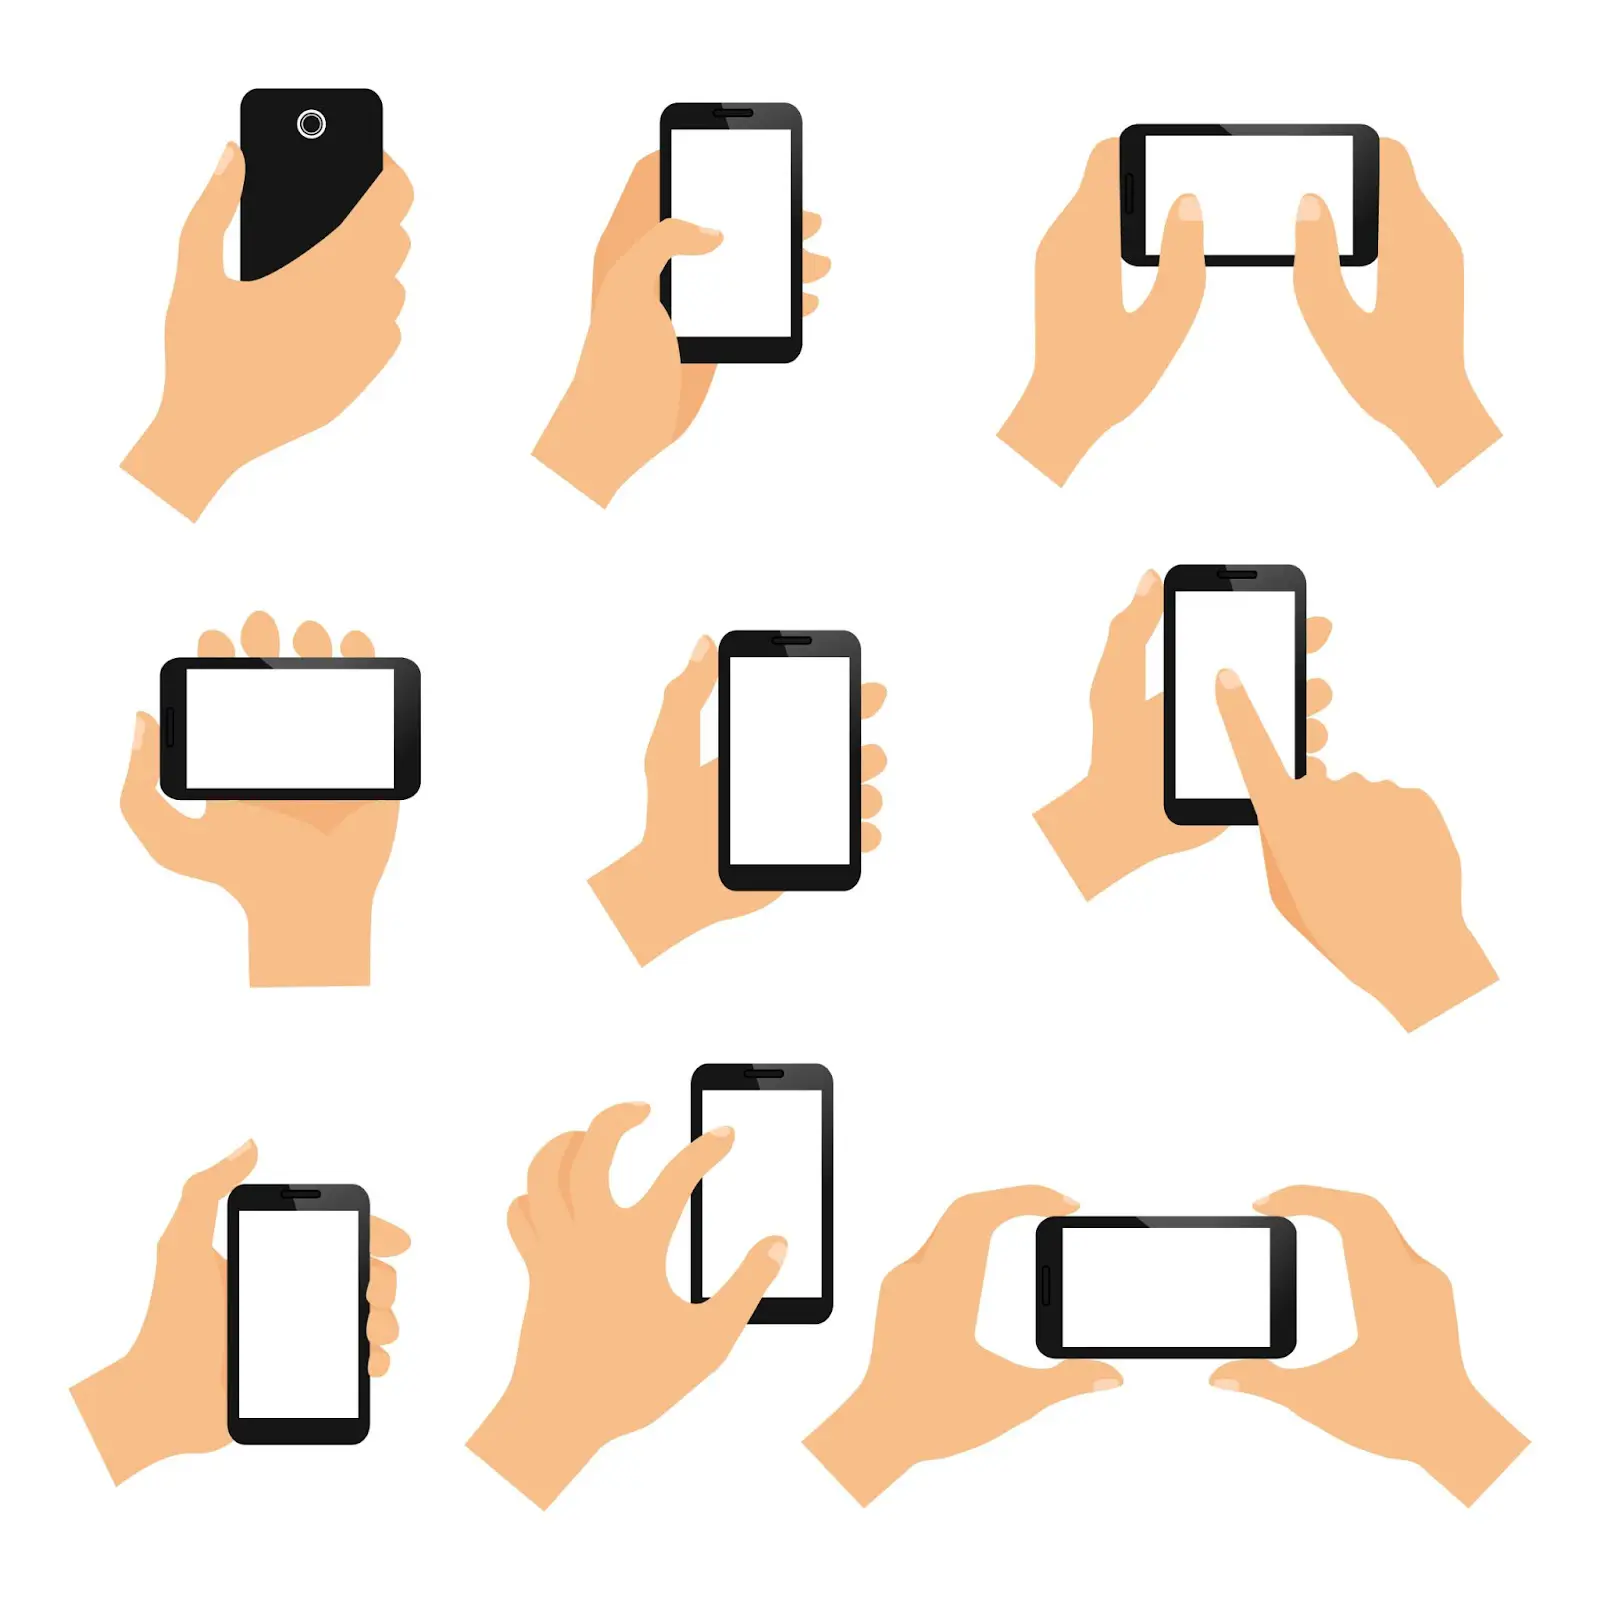 Concept image of different ways of interacting with an app